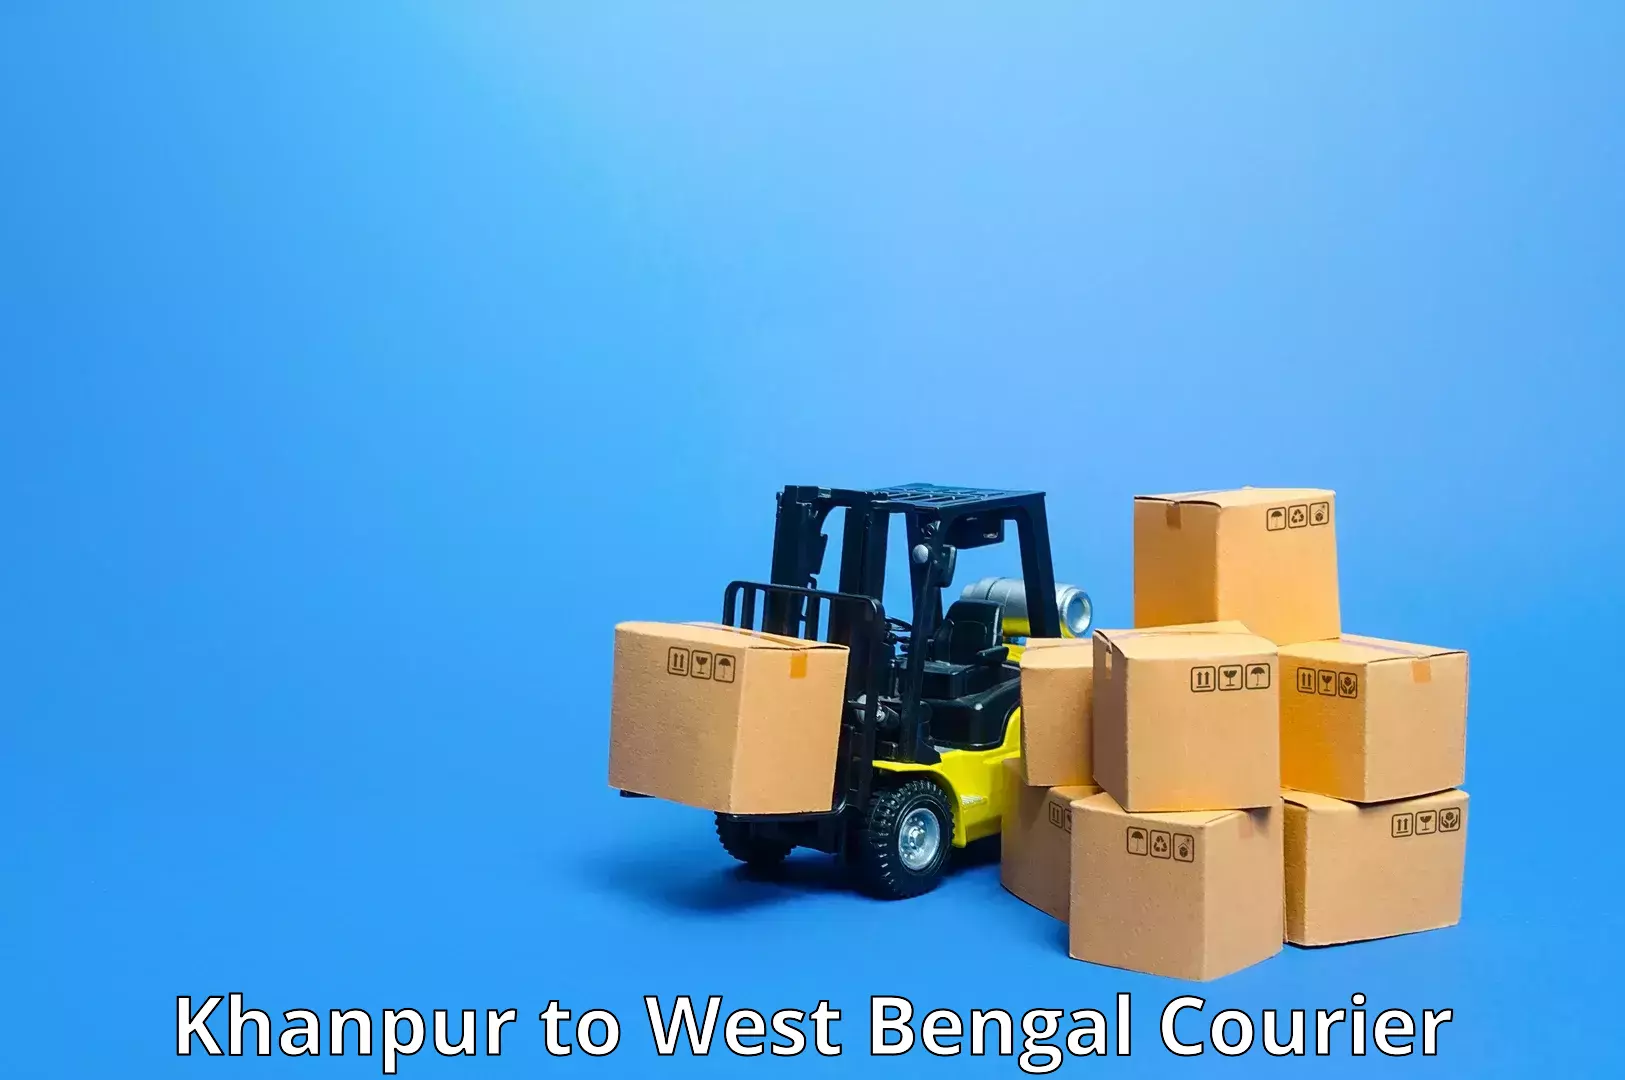 Parcel handling and care Khanpur to West Bengal